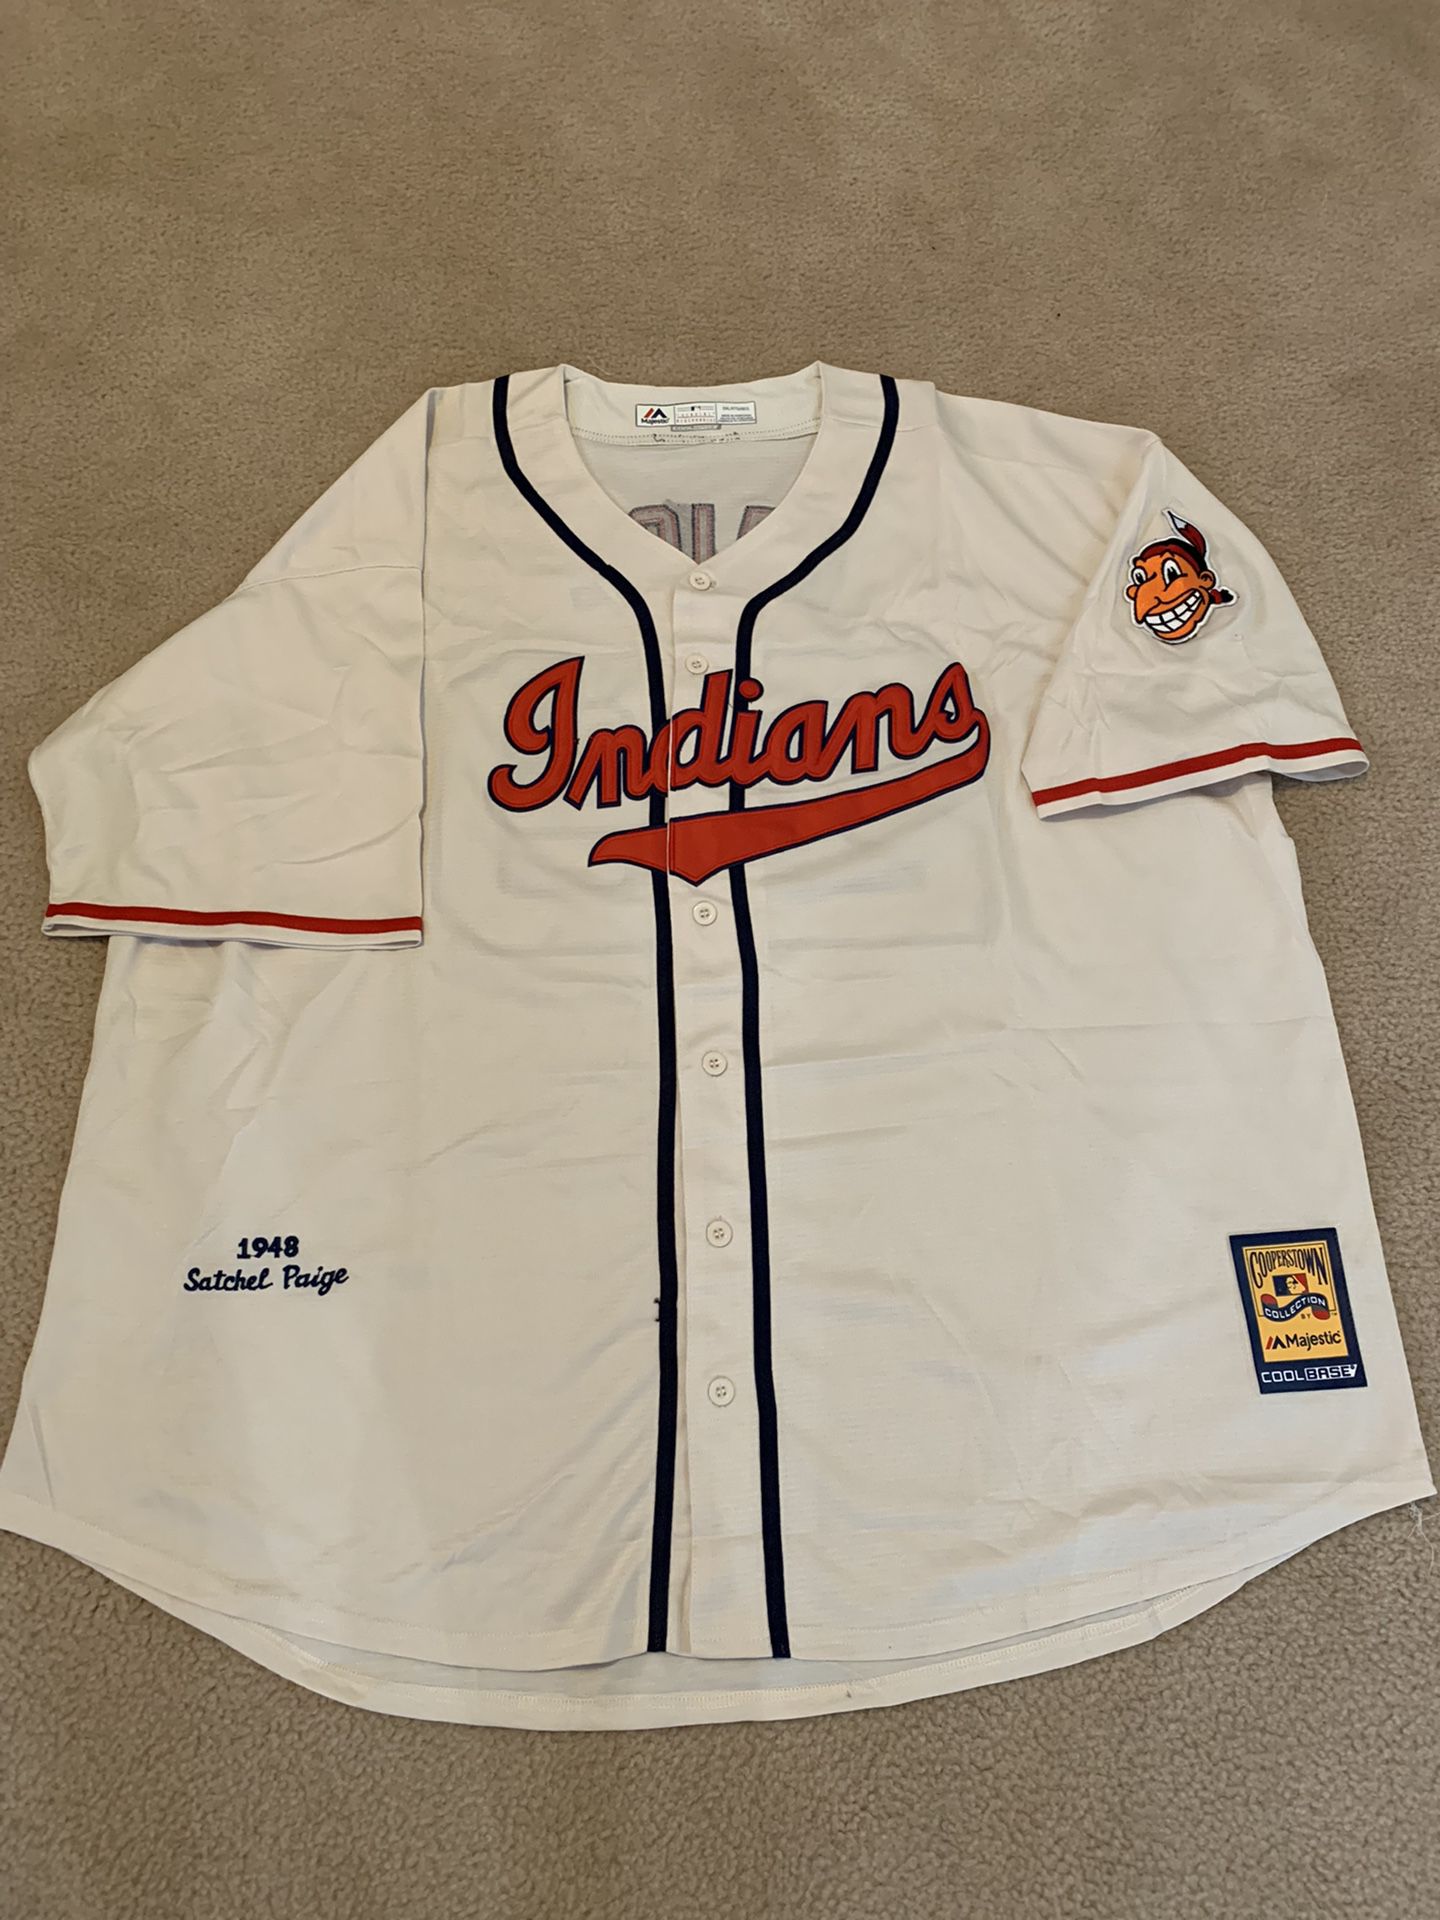 Satchel Paige Jersey for Sale in Cleveland, OH - OfferUp